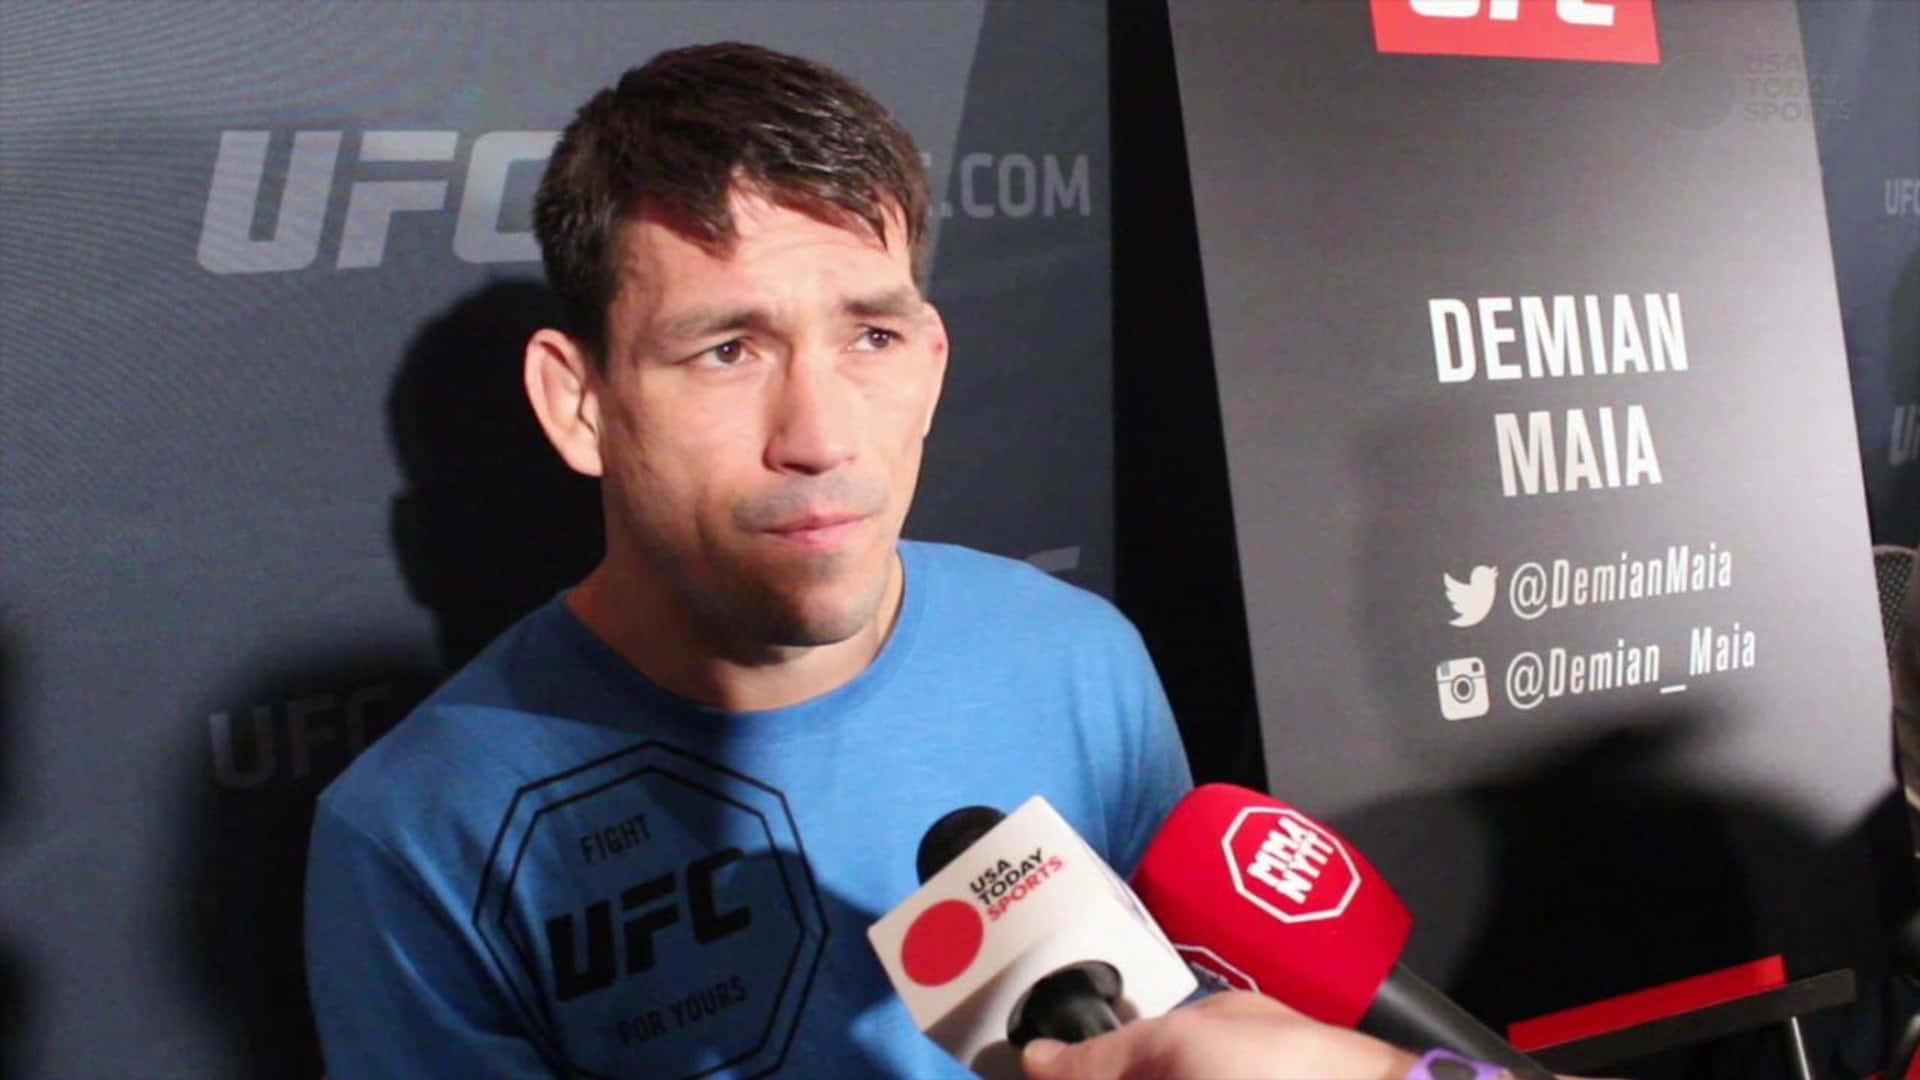 Demian Maia Ufc Fighter Interview Background